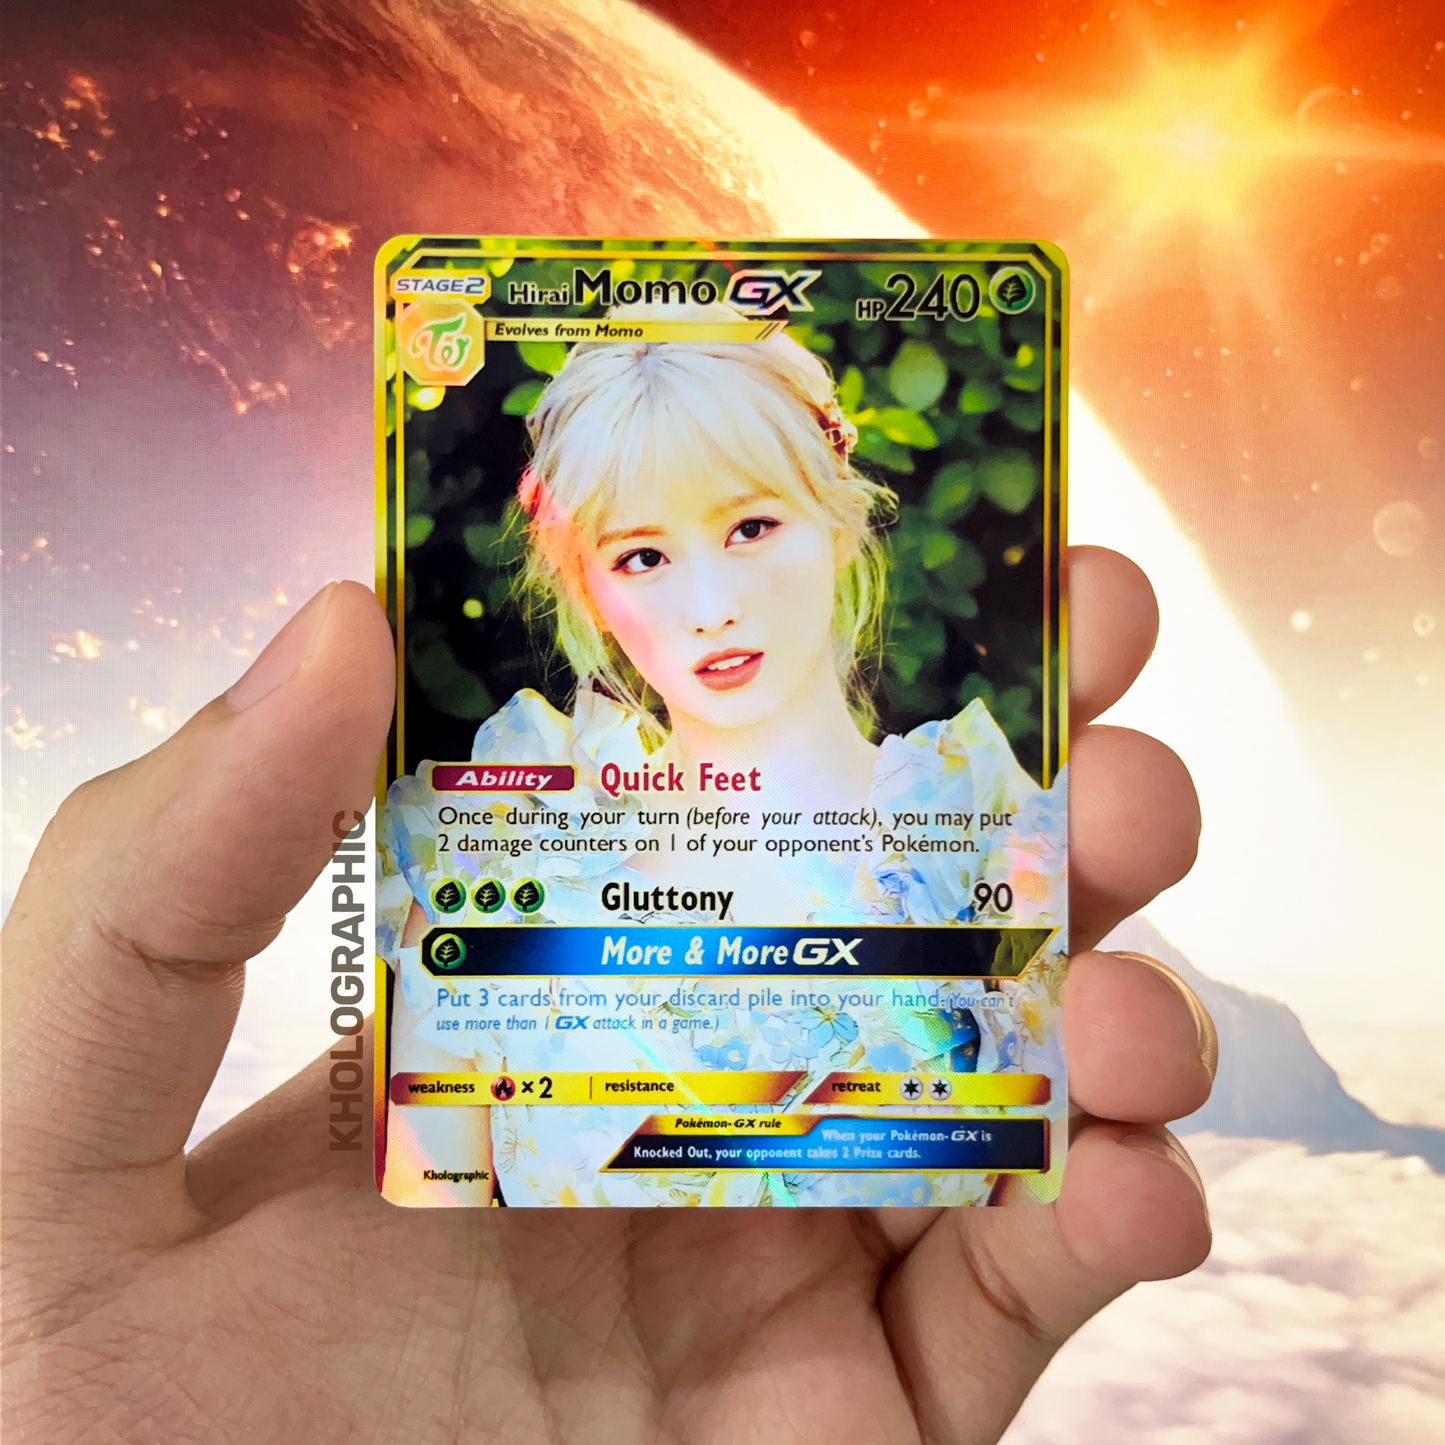 Twice Momo GX Gold Holographic Cards